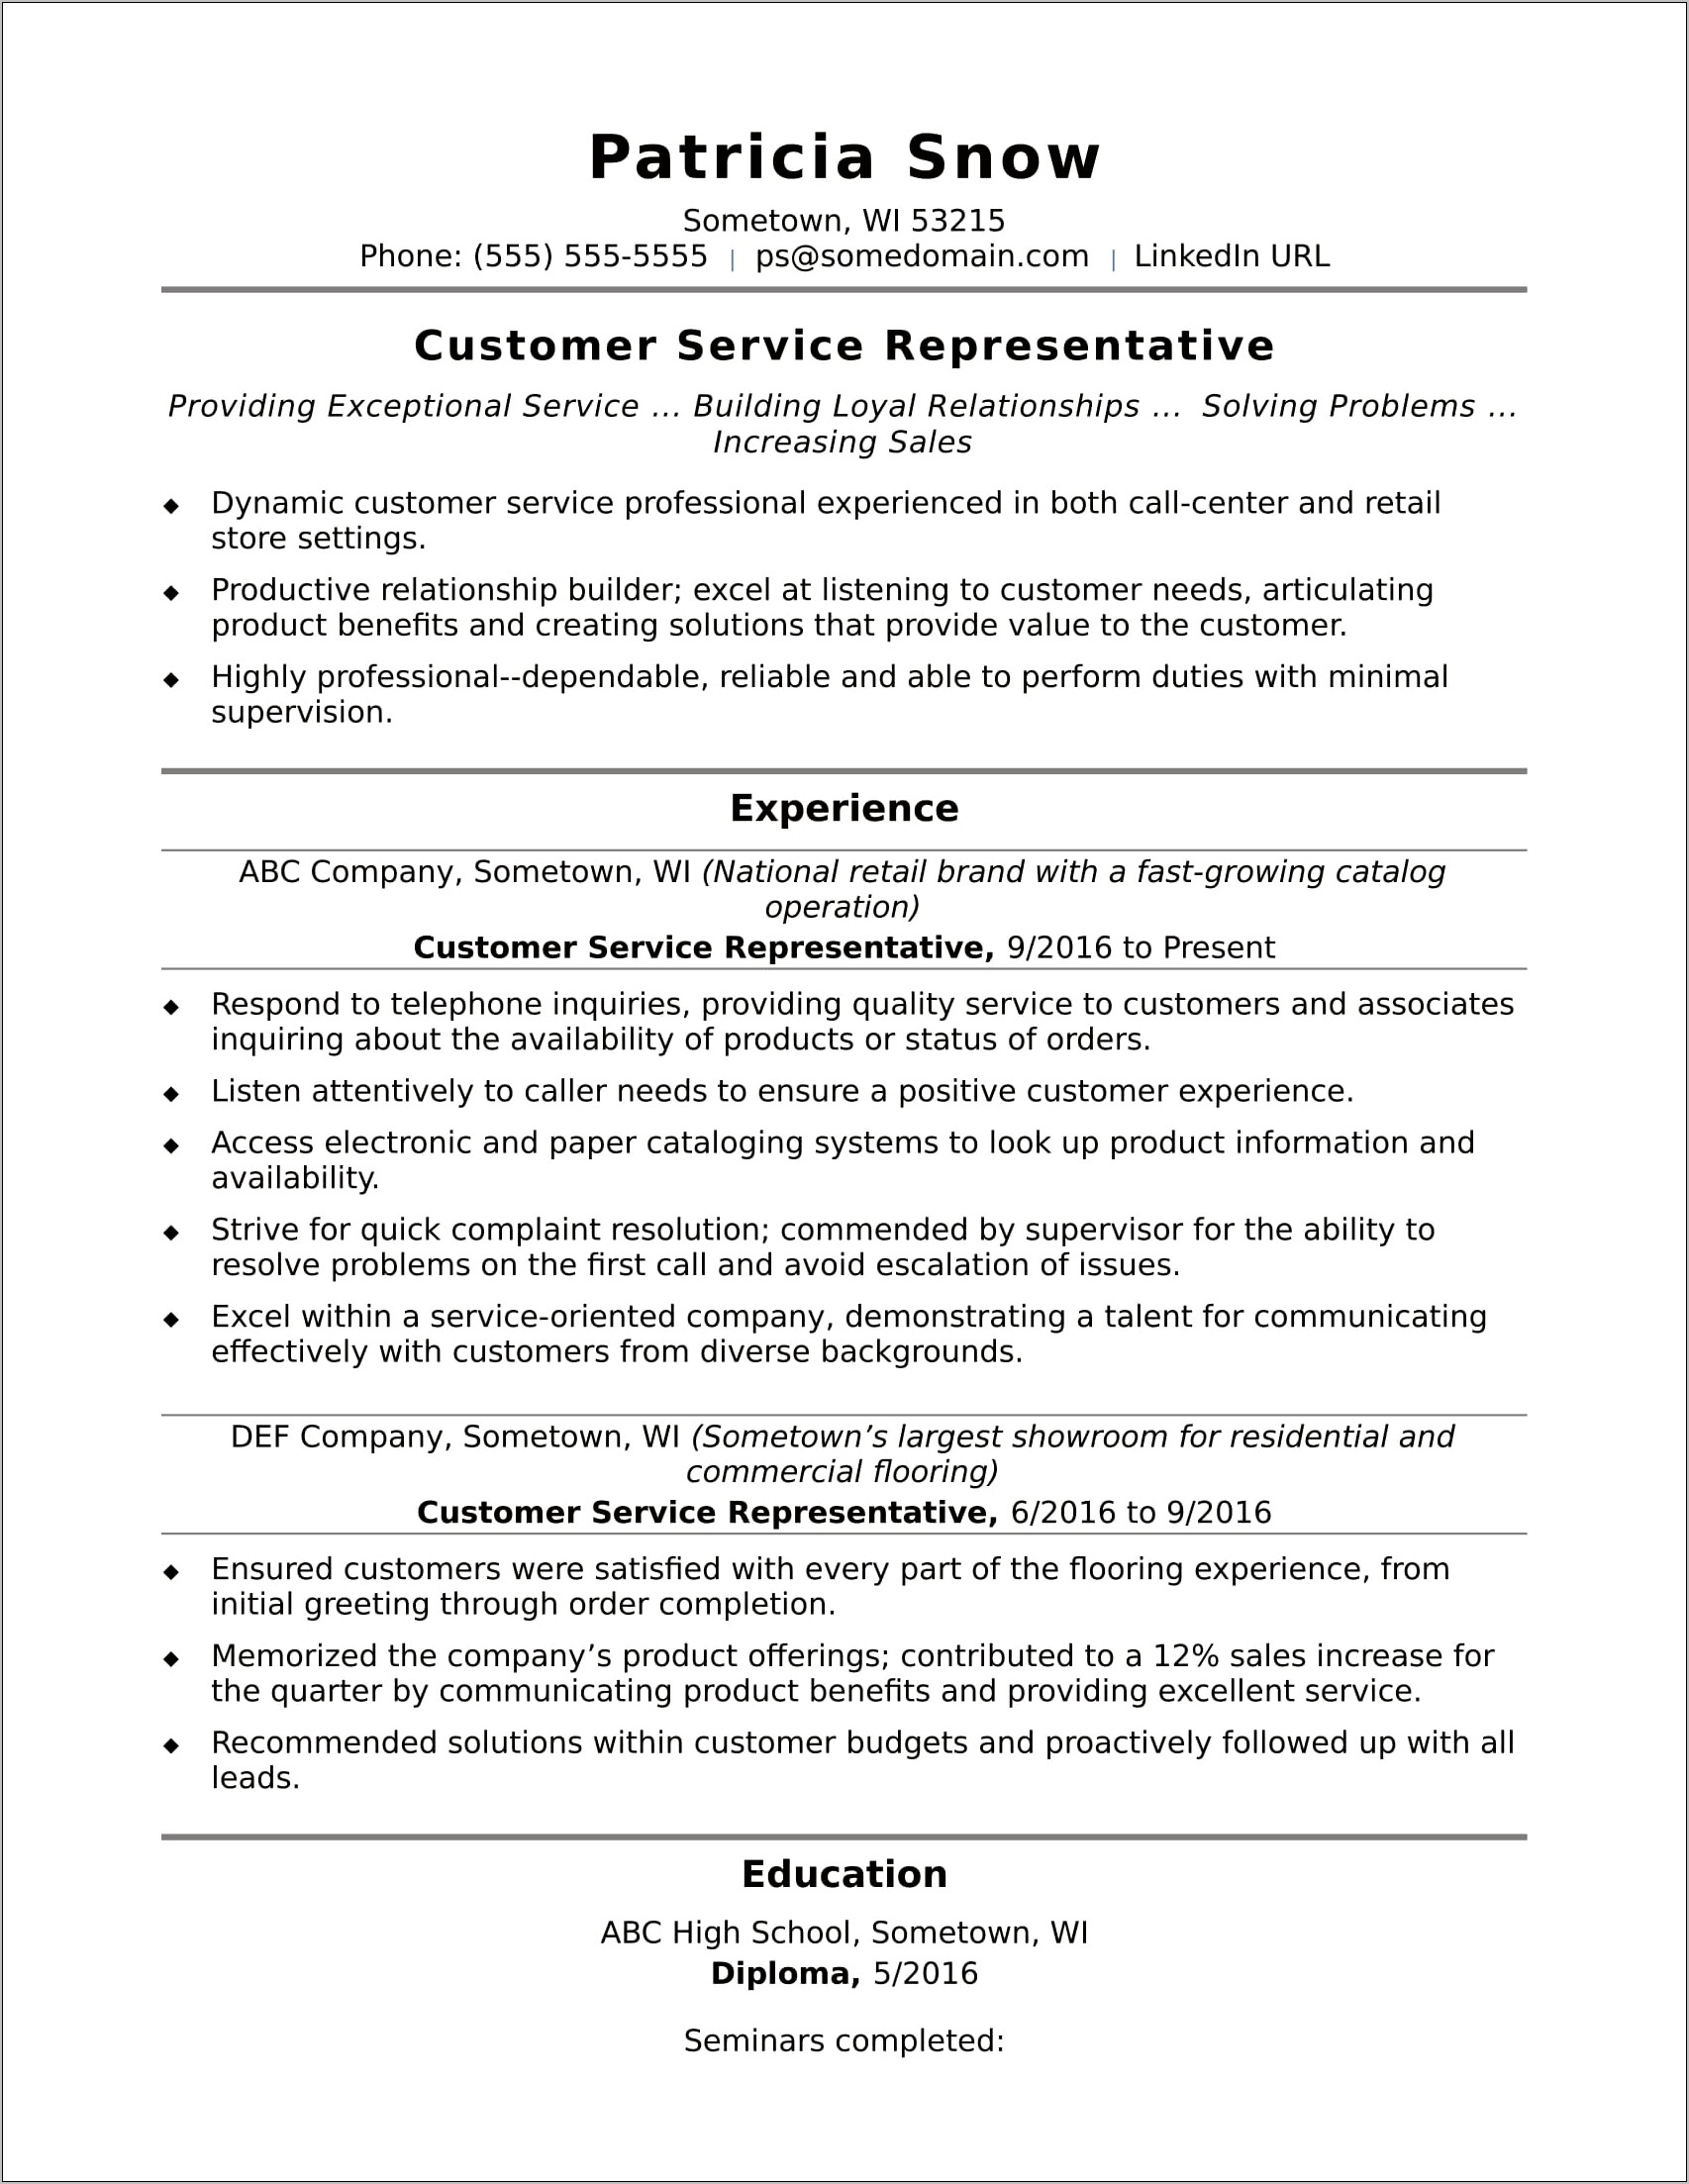 Resume Examples For Customer Service Objective